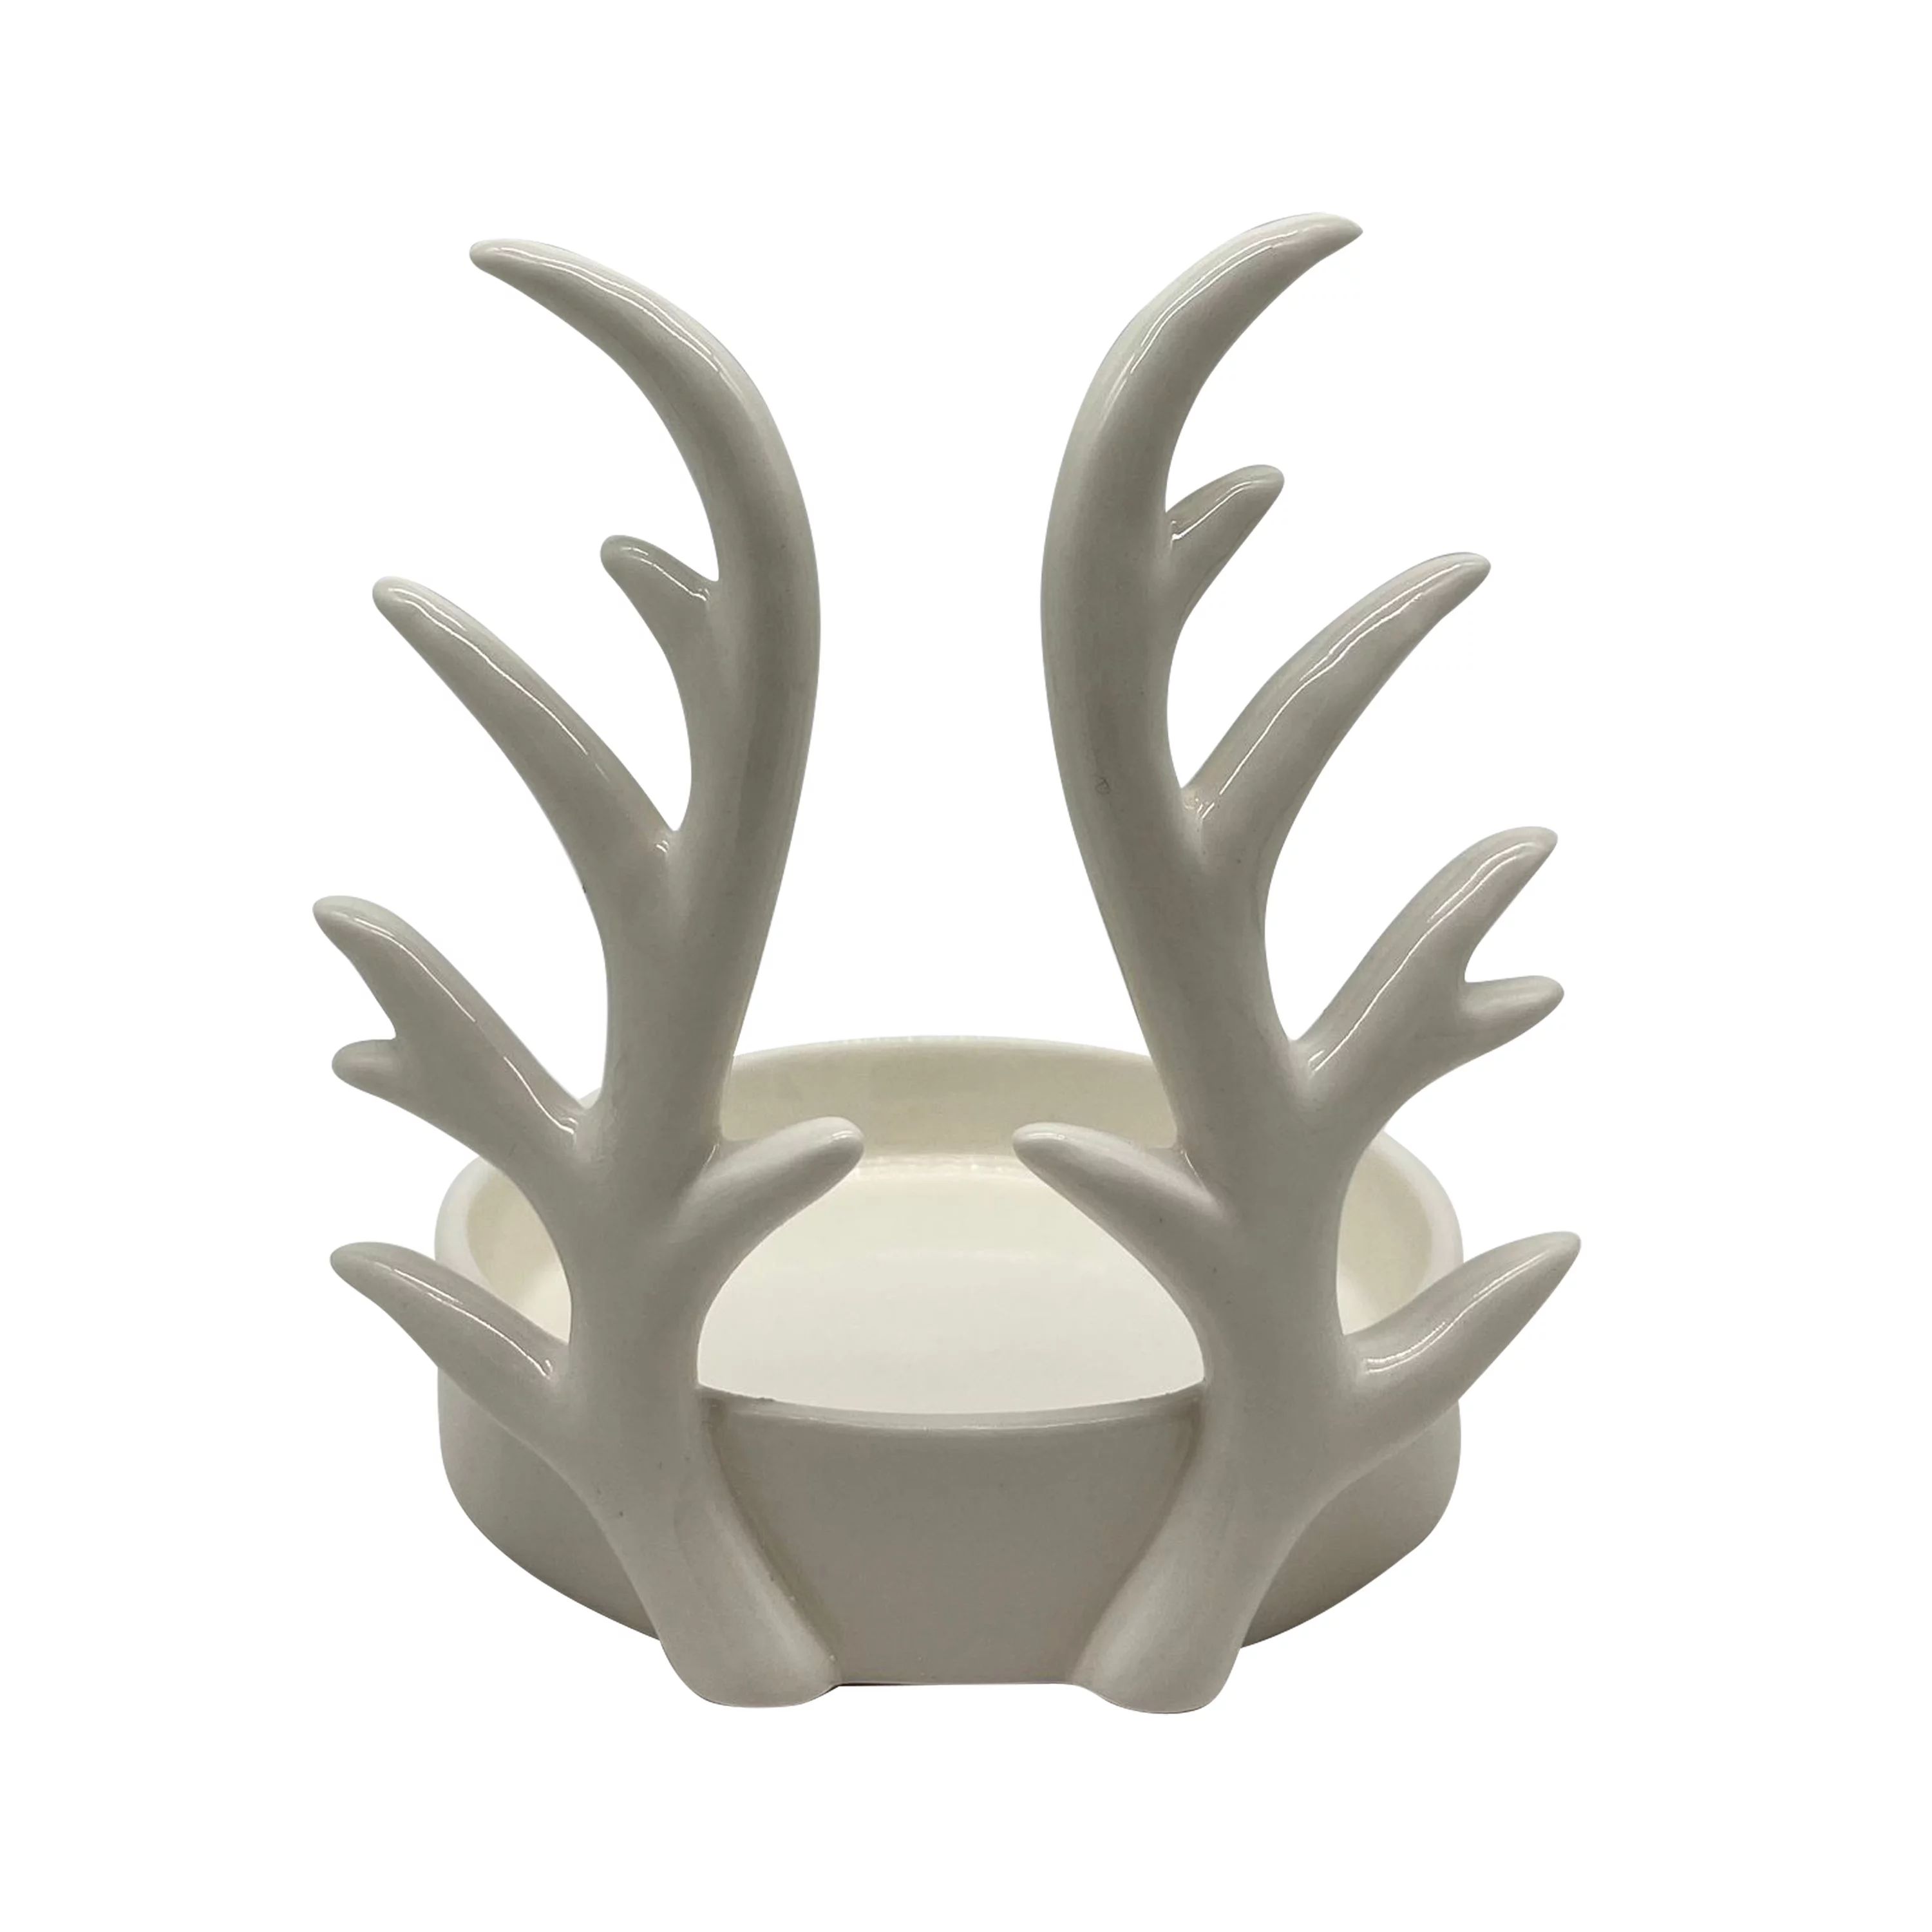 Large White Ceramic Antler Candle Holder, 5.25", by Holiday Time | Walmart (US)